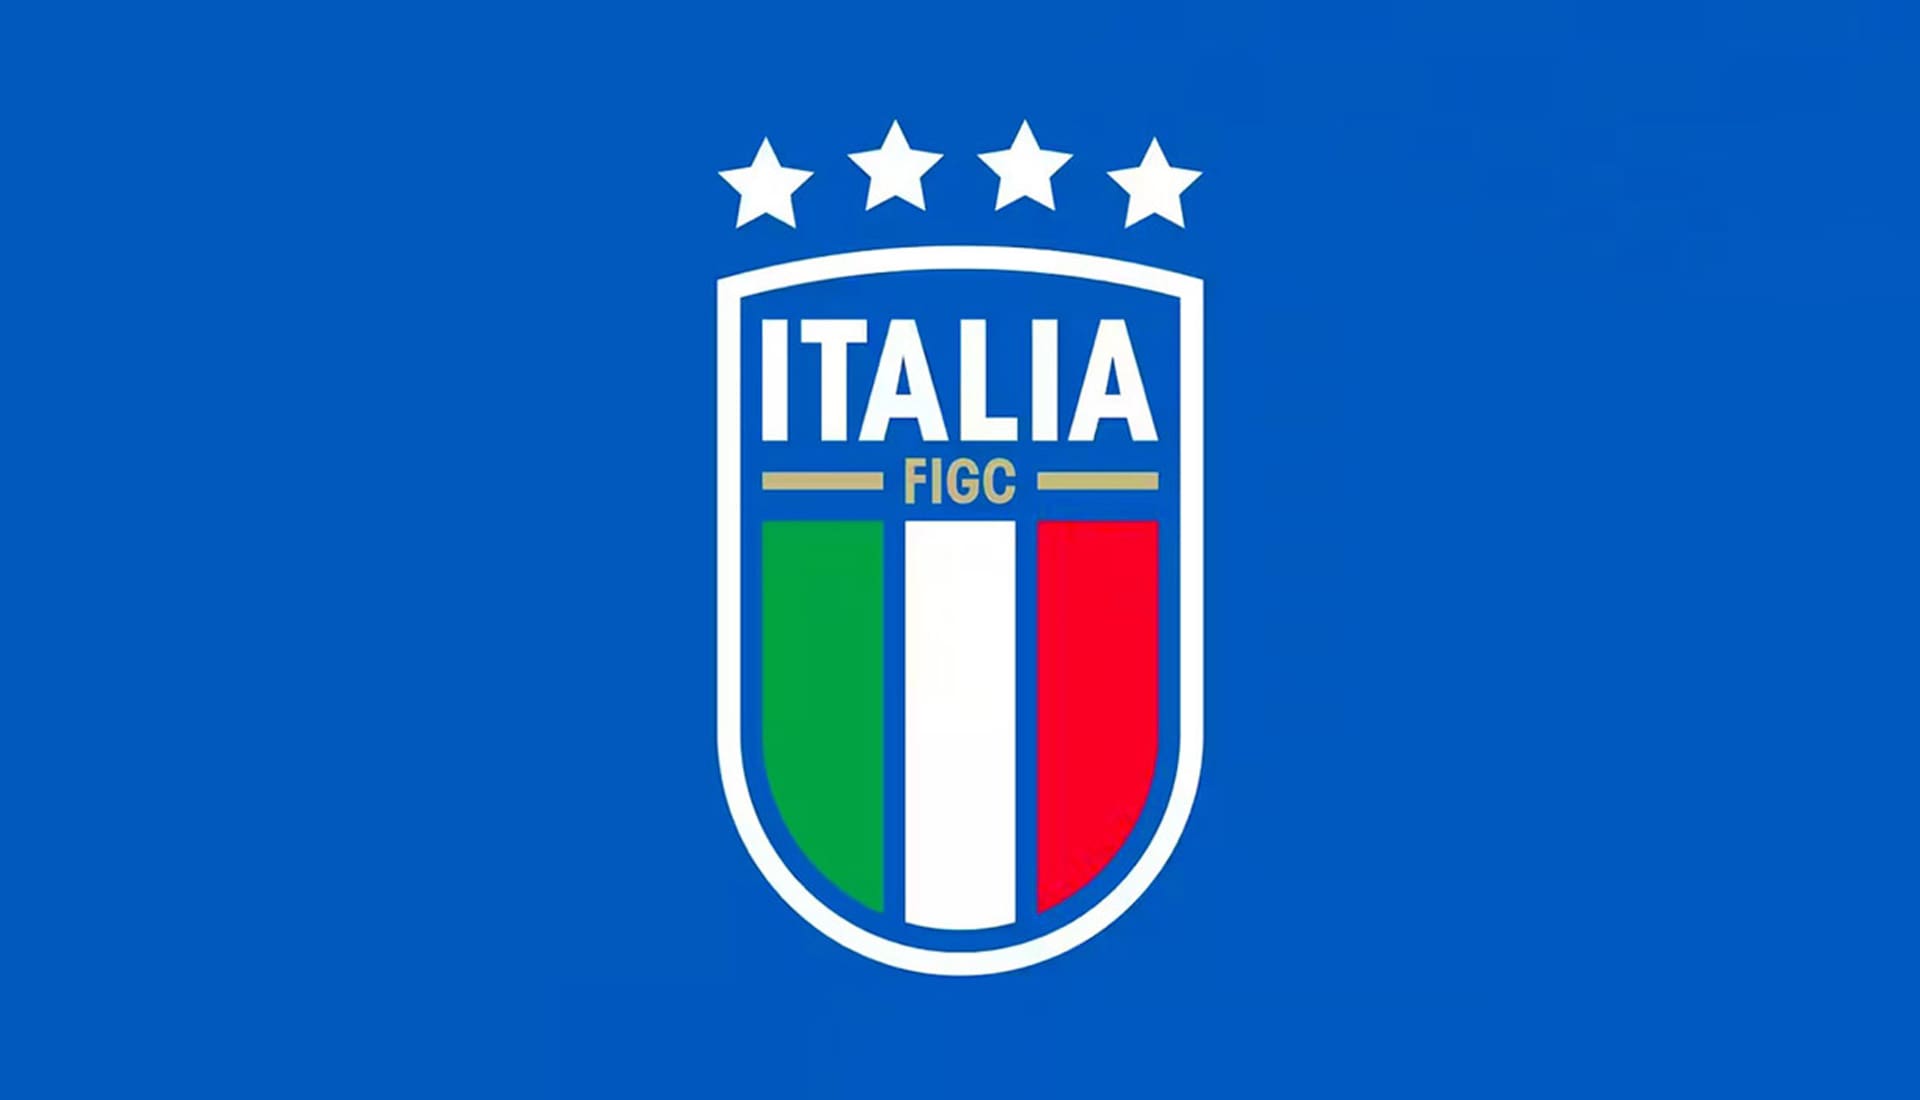 Italian National Team Unveil New Crest - SoccerBible